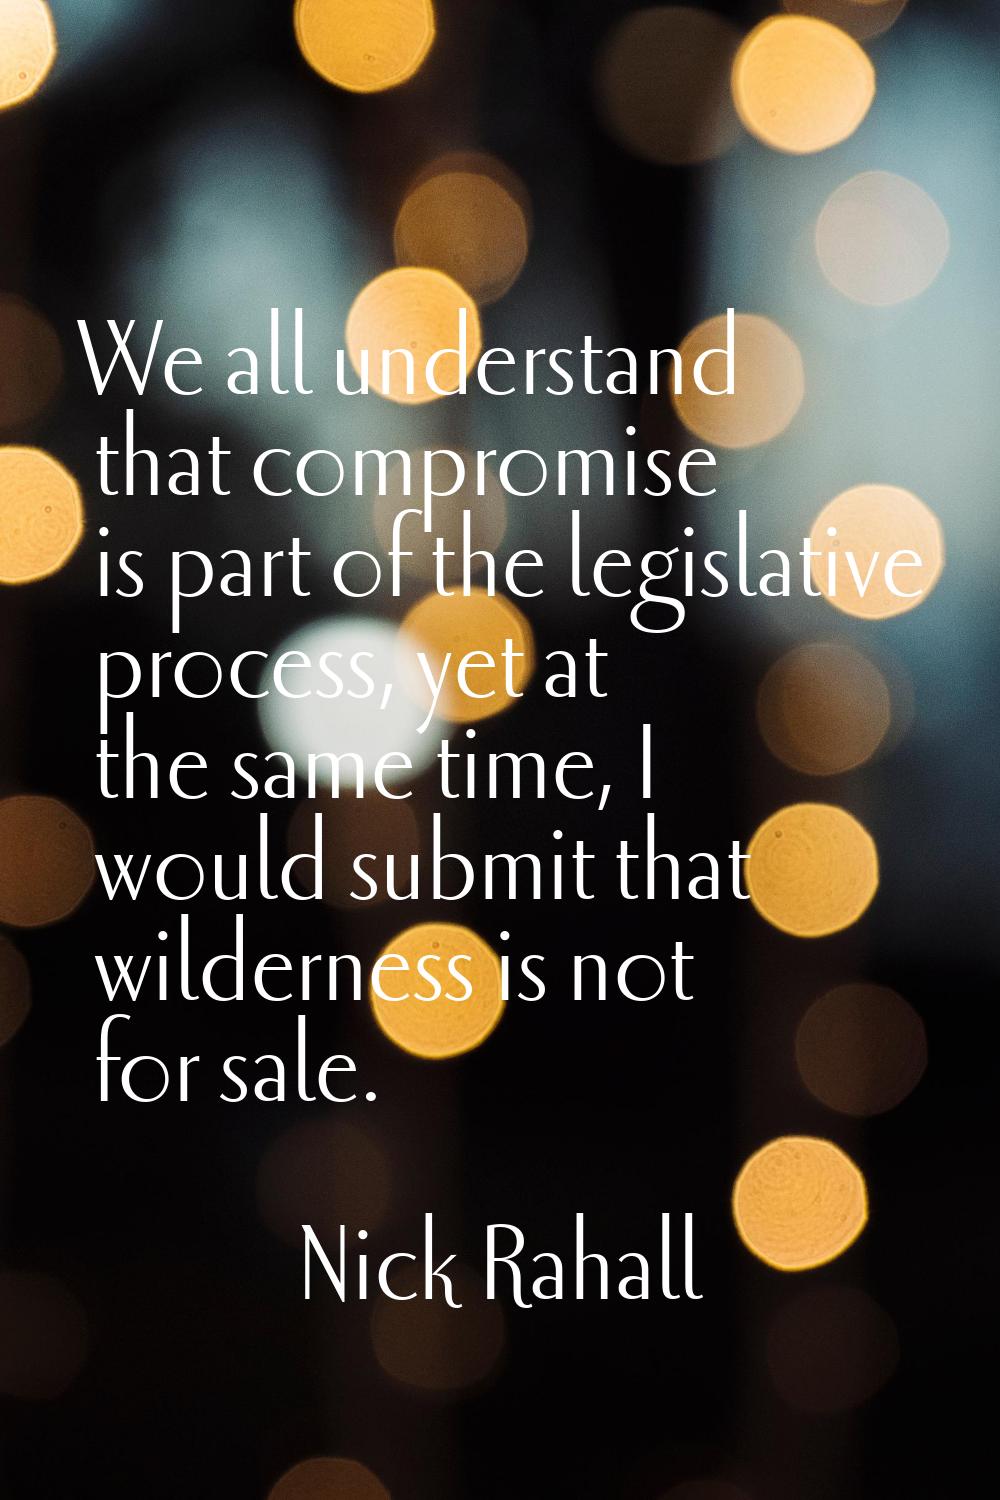 We all understand that compromise is part of the legislative process, yet at the same time, I would